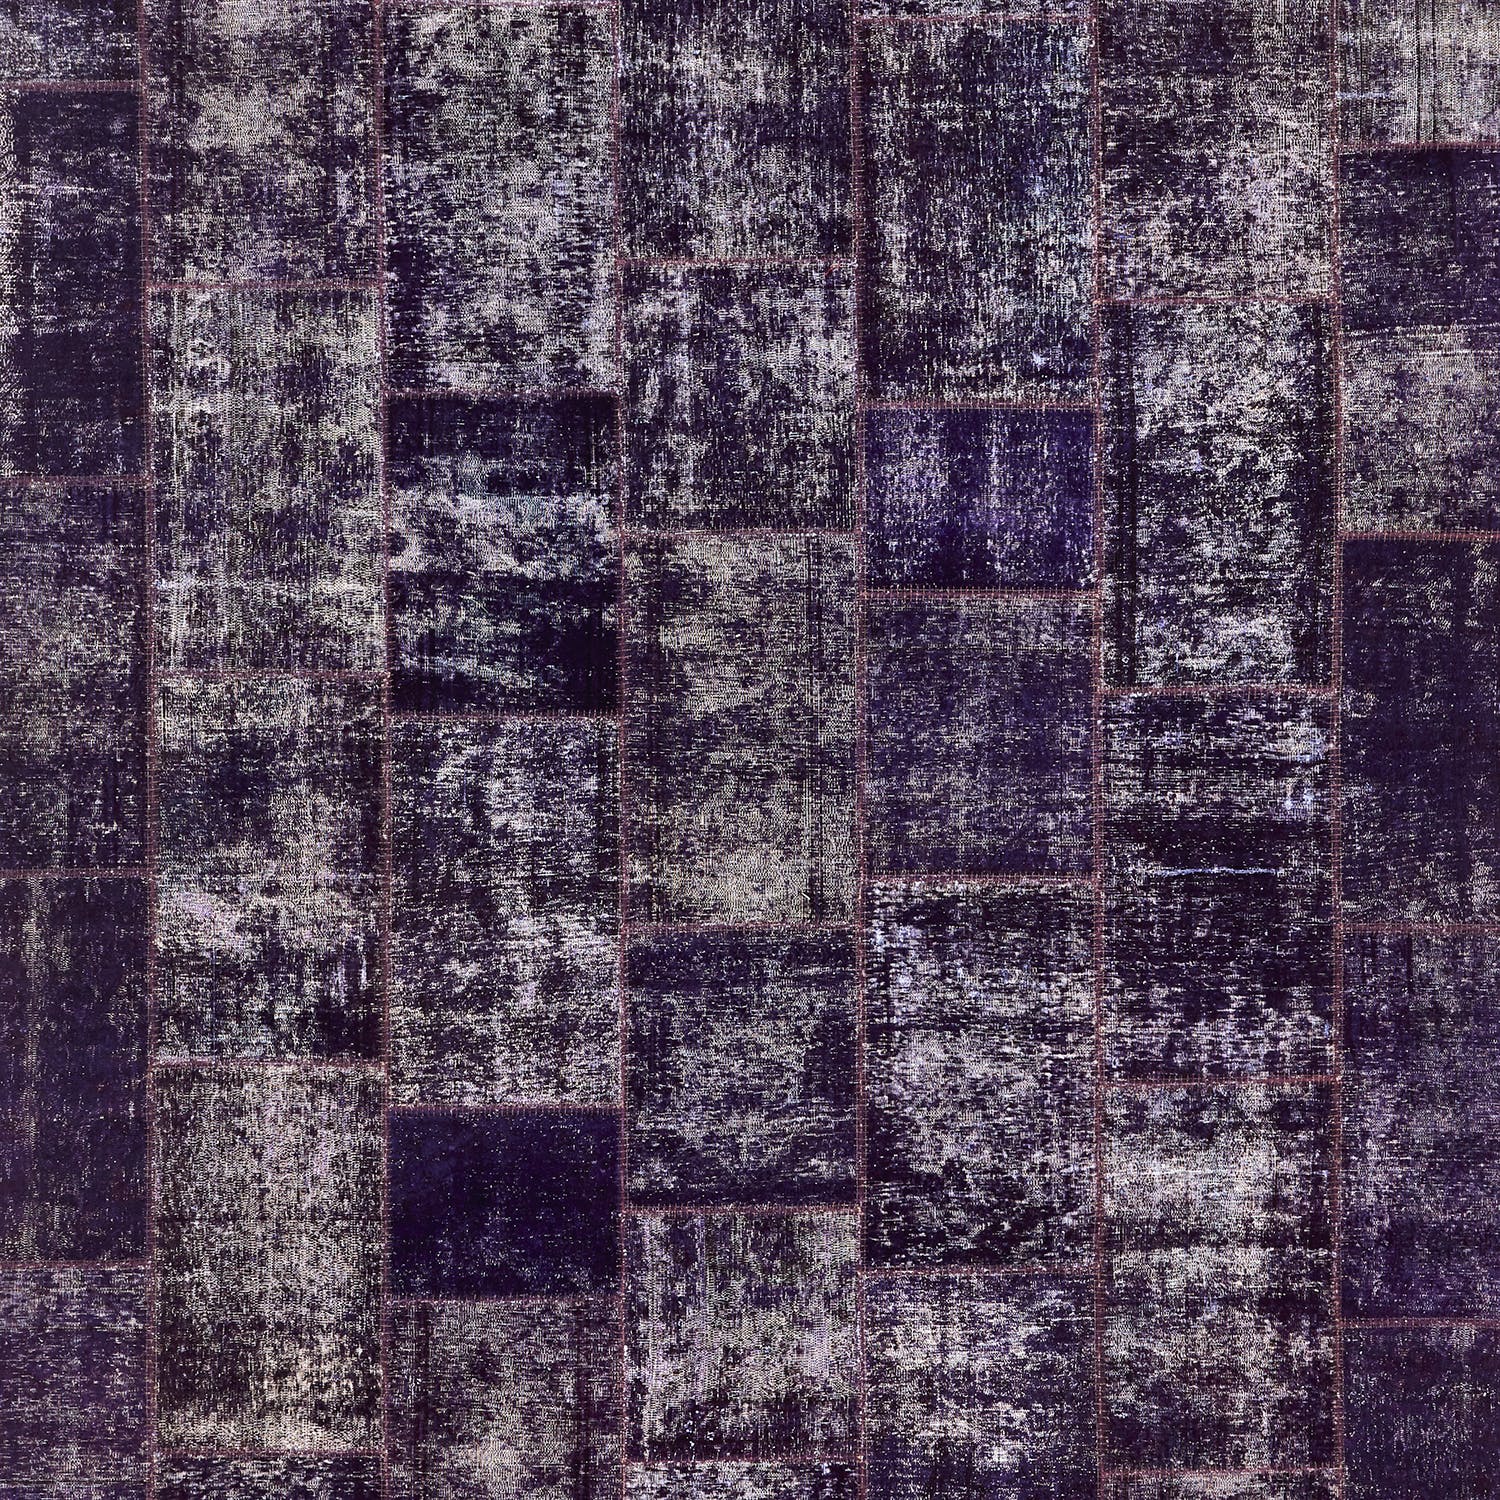 Moody grid of weathered purple and blue textured squares.